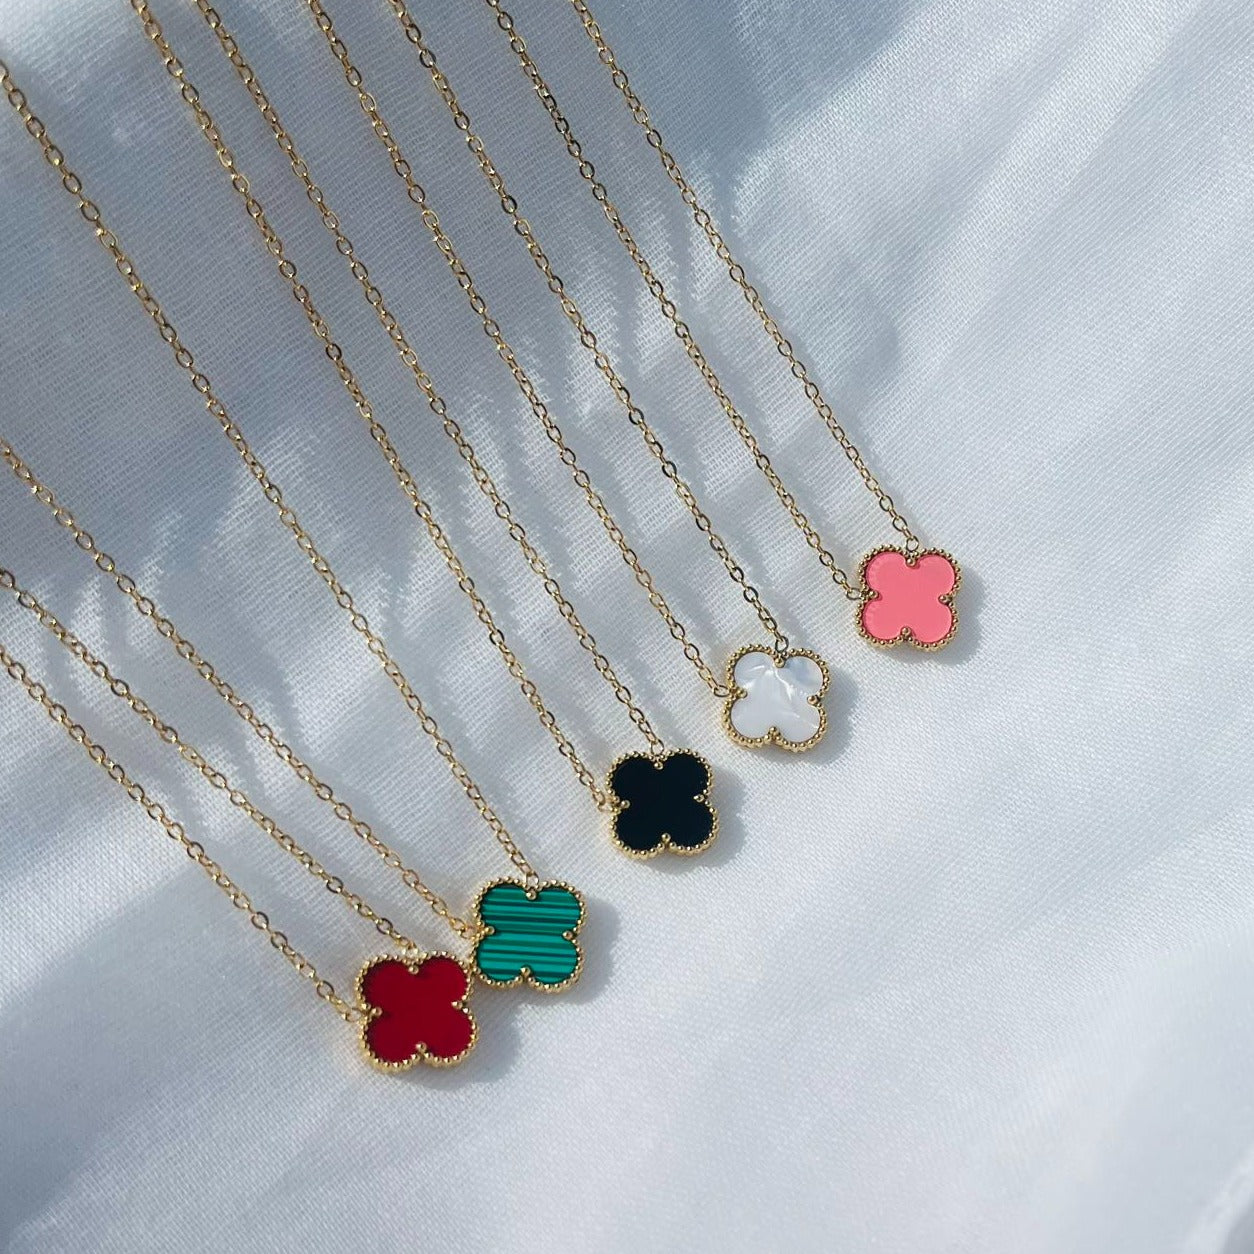 Gold Chain with Color Clover Diamond Pendant Necklace